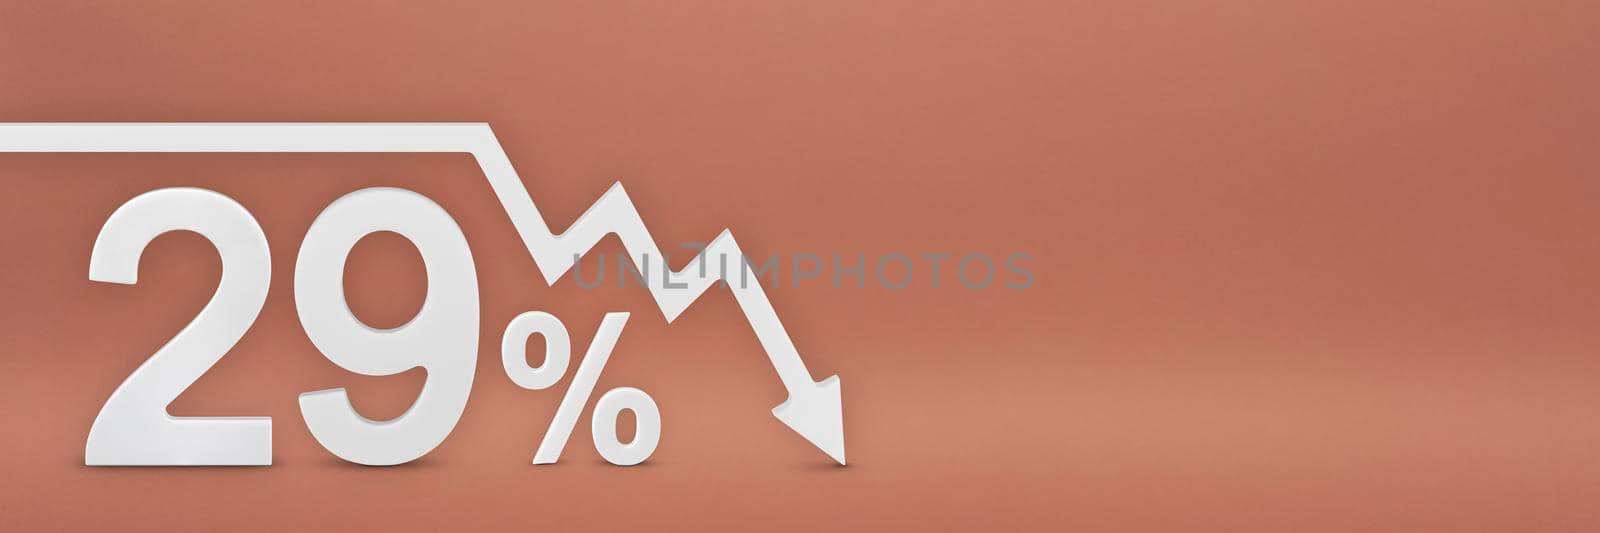 twenty-nine percent, the arrow on the graph is pointing down. Stock market crash, bear market, inflation.Economic collapse, collapse of stocks.3d banner,29 percent discount sign on a red background. by SERSOL